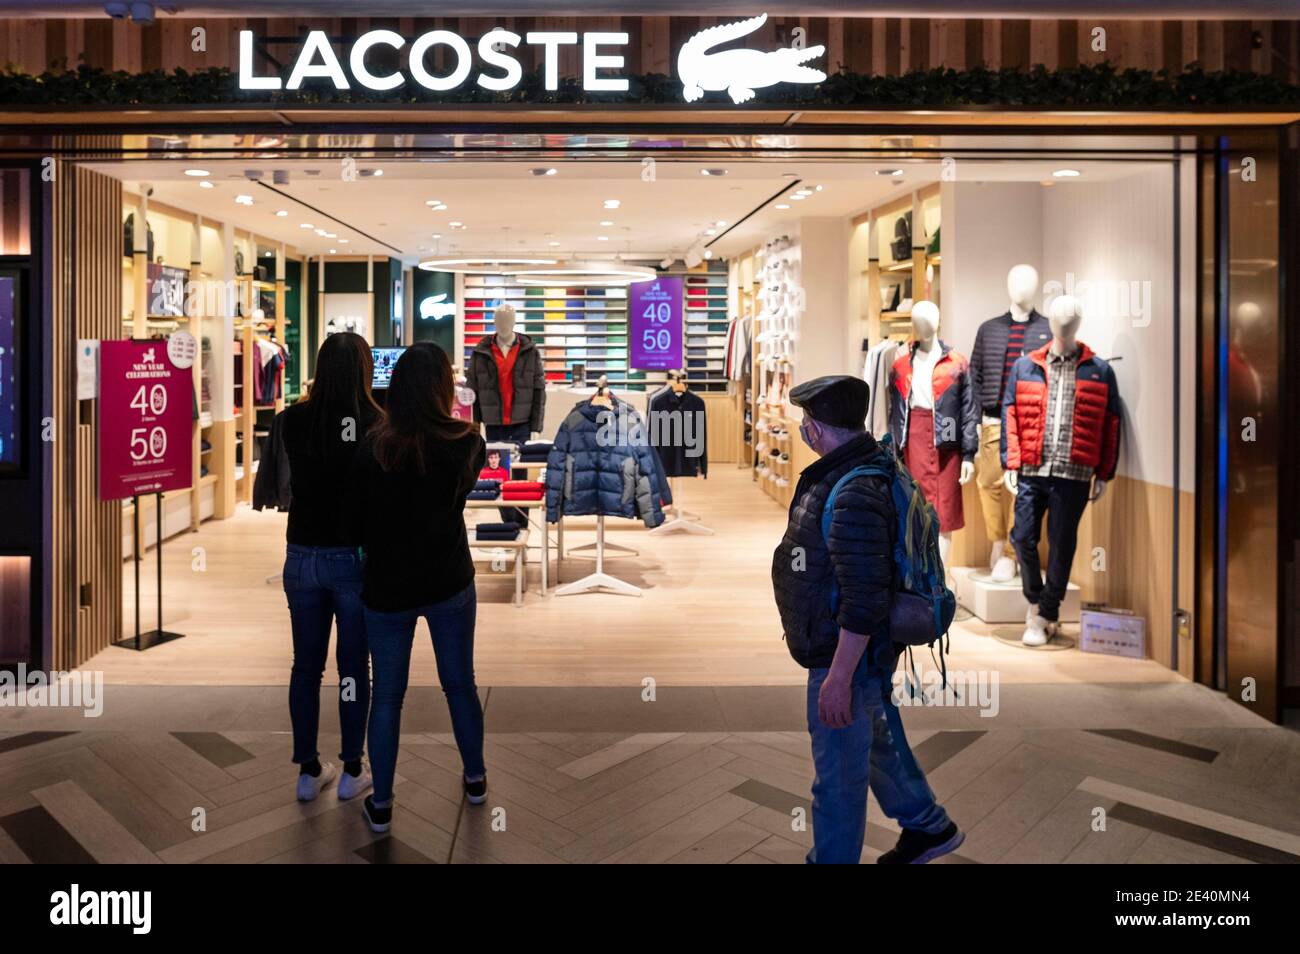 Hong Kong, 16th 2021. French clothing brand Lacoste store and logo seen in Hong Kong. Credit: Budrul Chukrut/SOPA Images/ZUMA Wire/Alamy Live News Stock Photo - Alamy